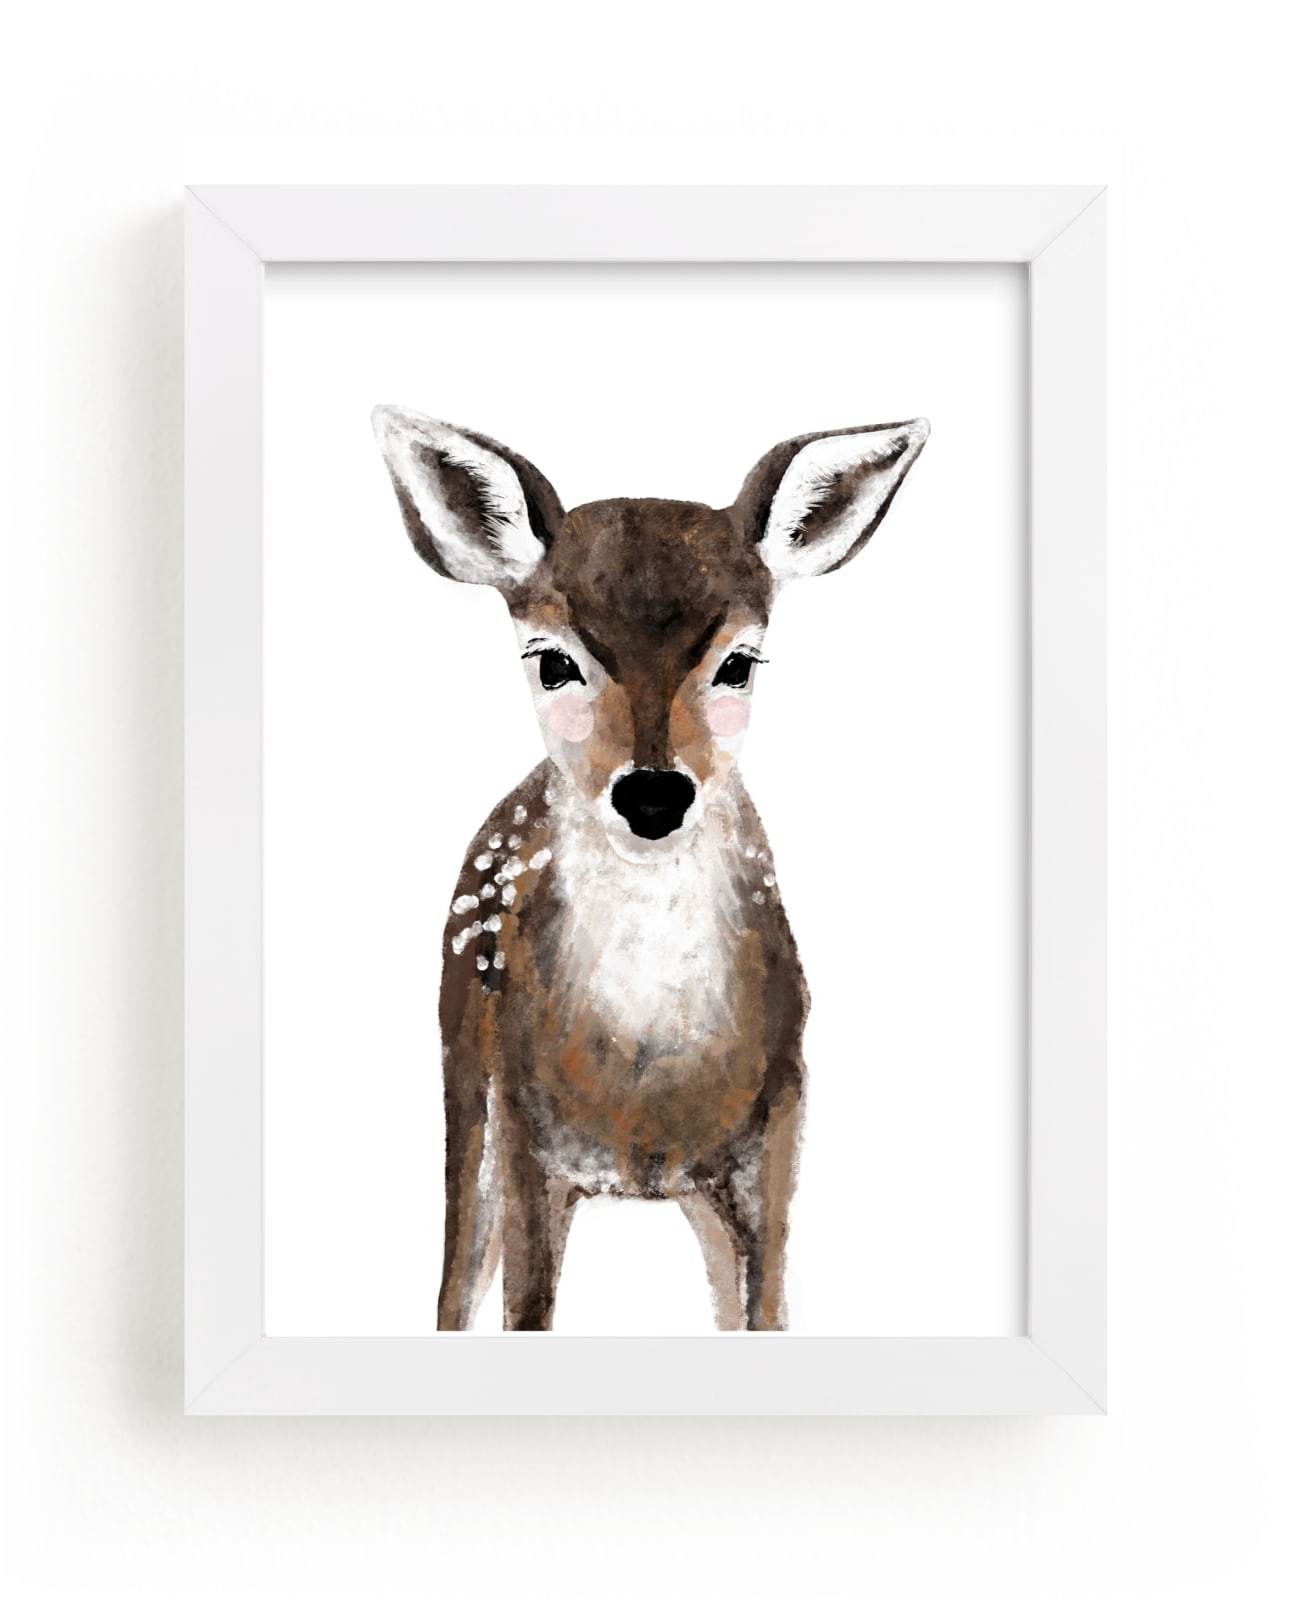 This is a brown kids wall art by Cass Loh called Baby Animal Deer.